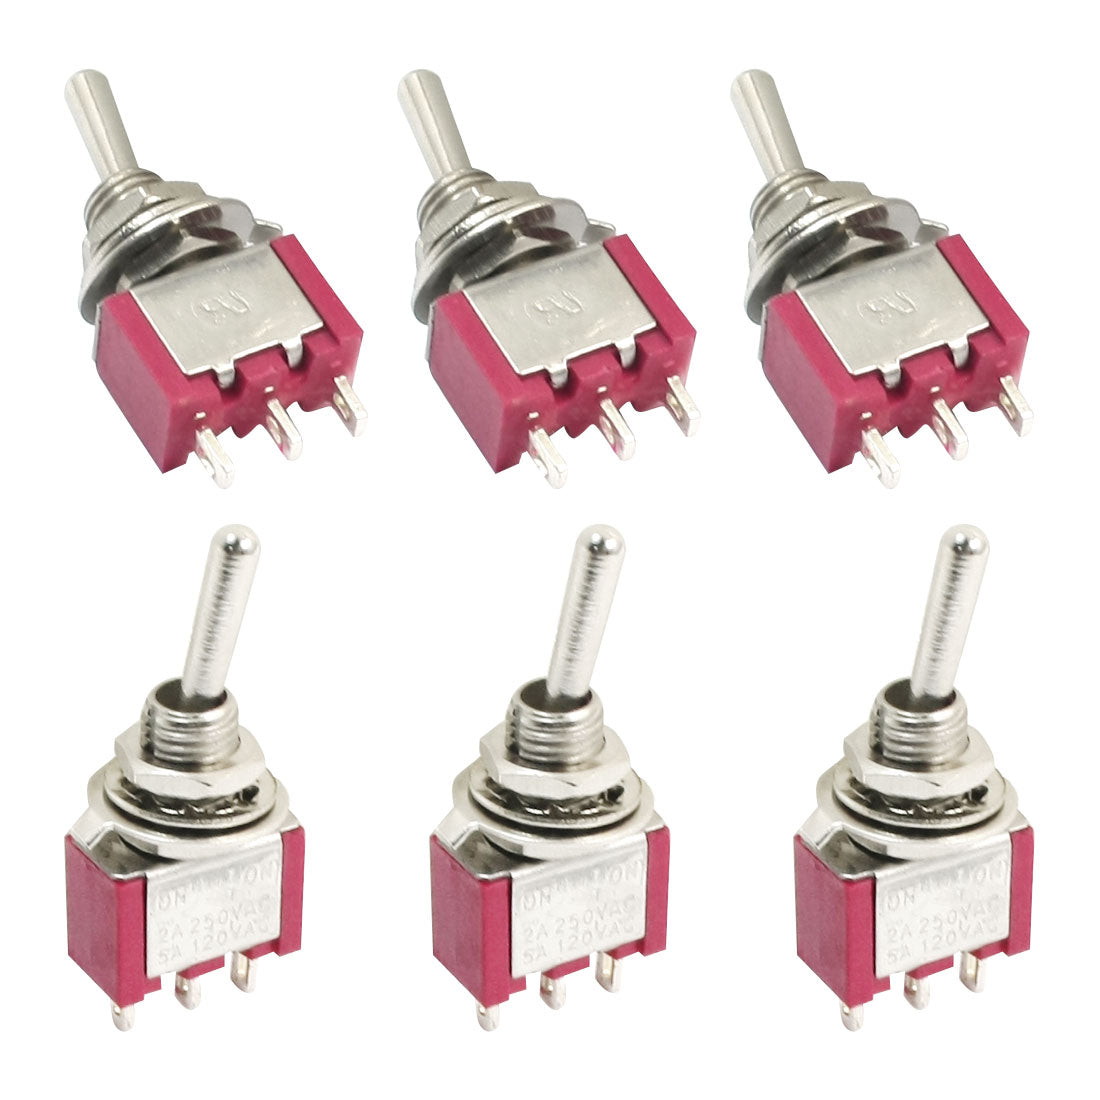 uxcell Uxcell SPDT ON-OFF-ON 3 Position Momentary Electric Toggle Switch AC 120V 5A Red 6pcs